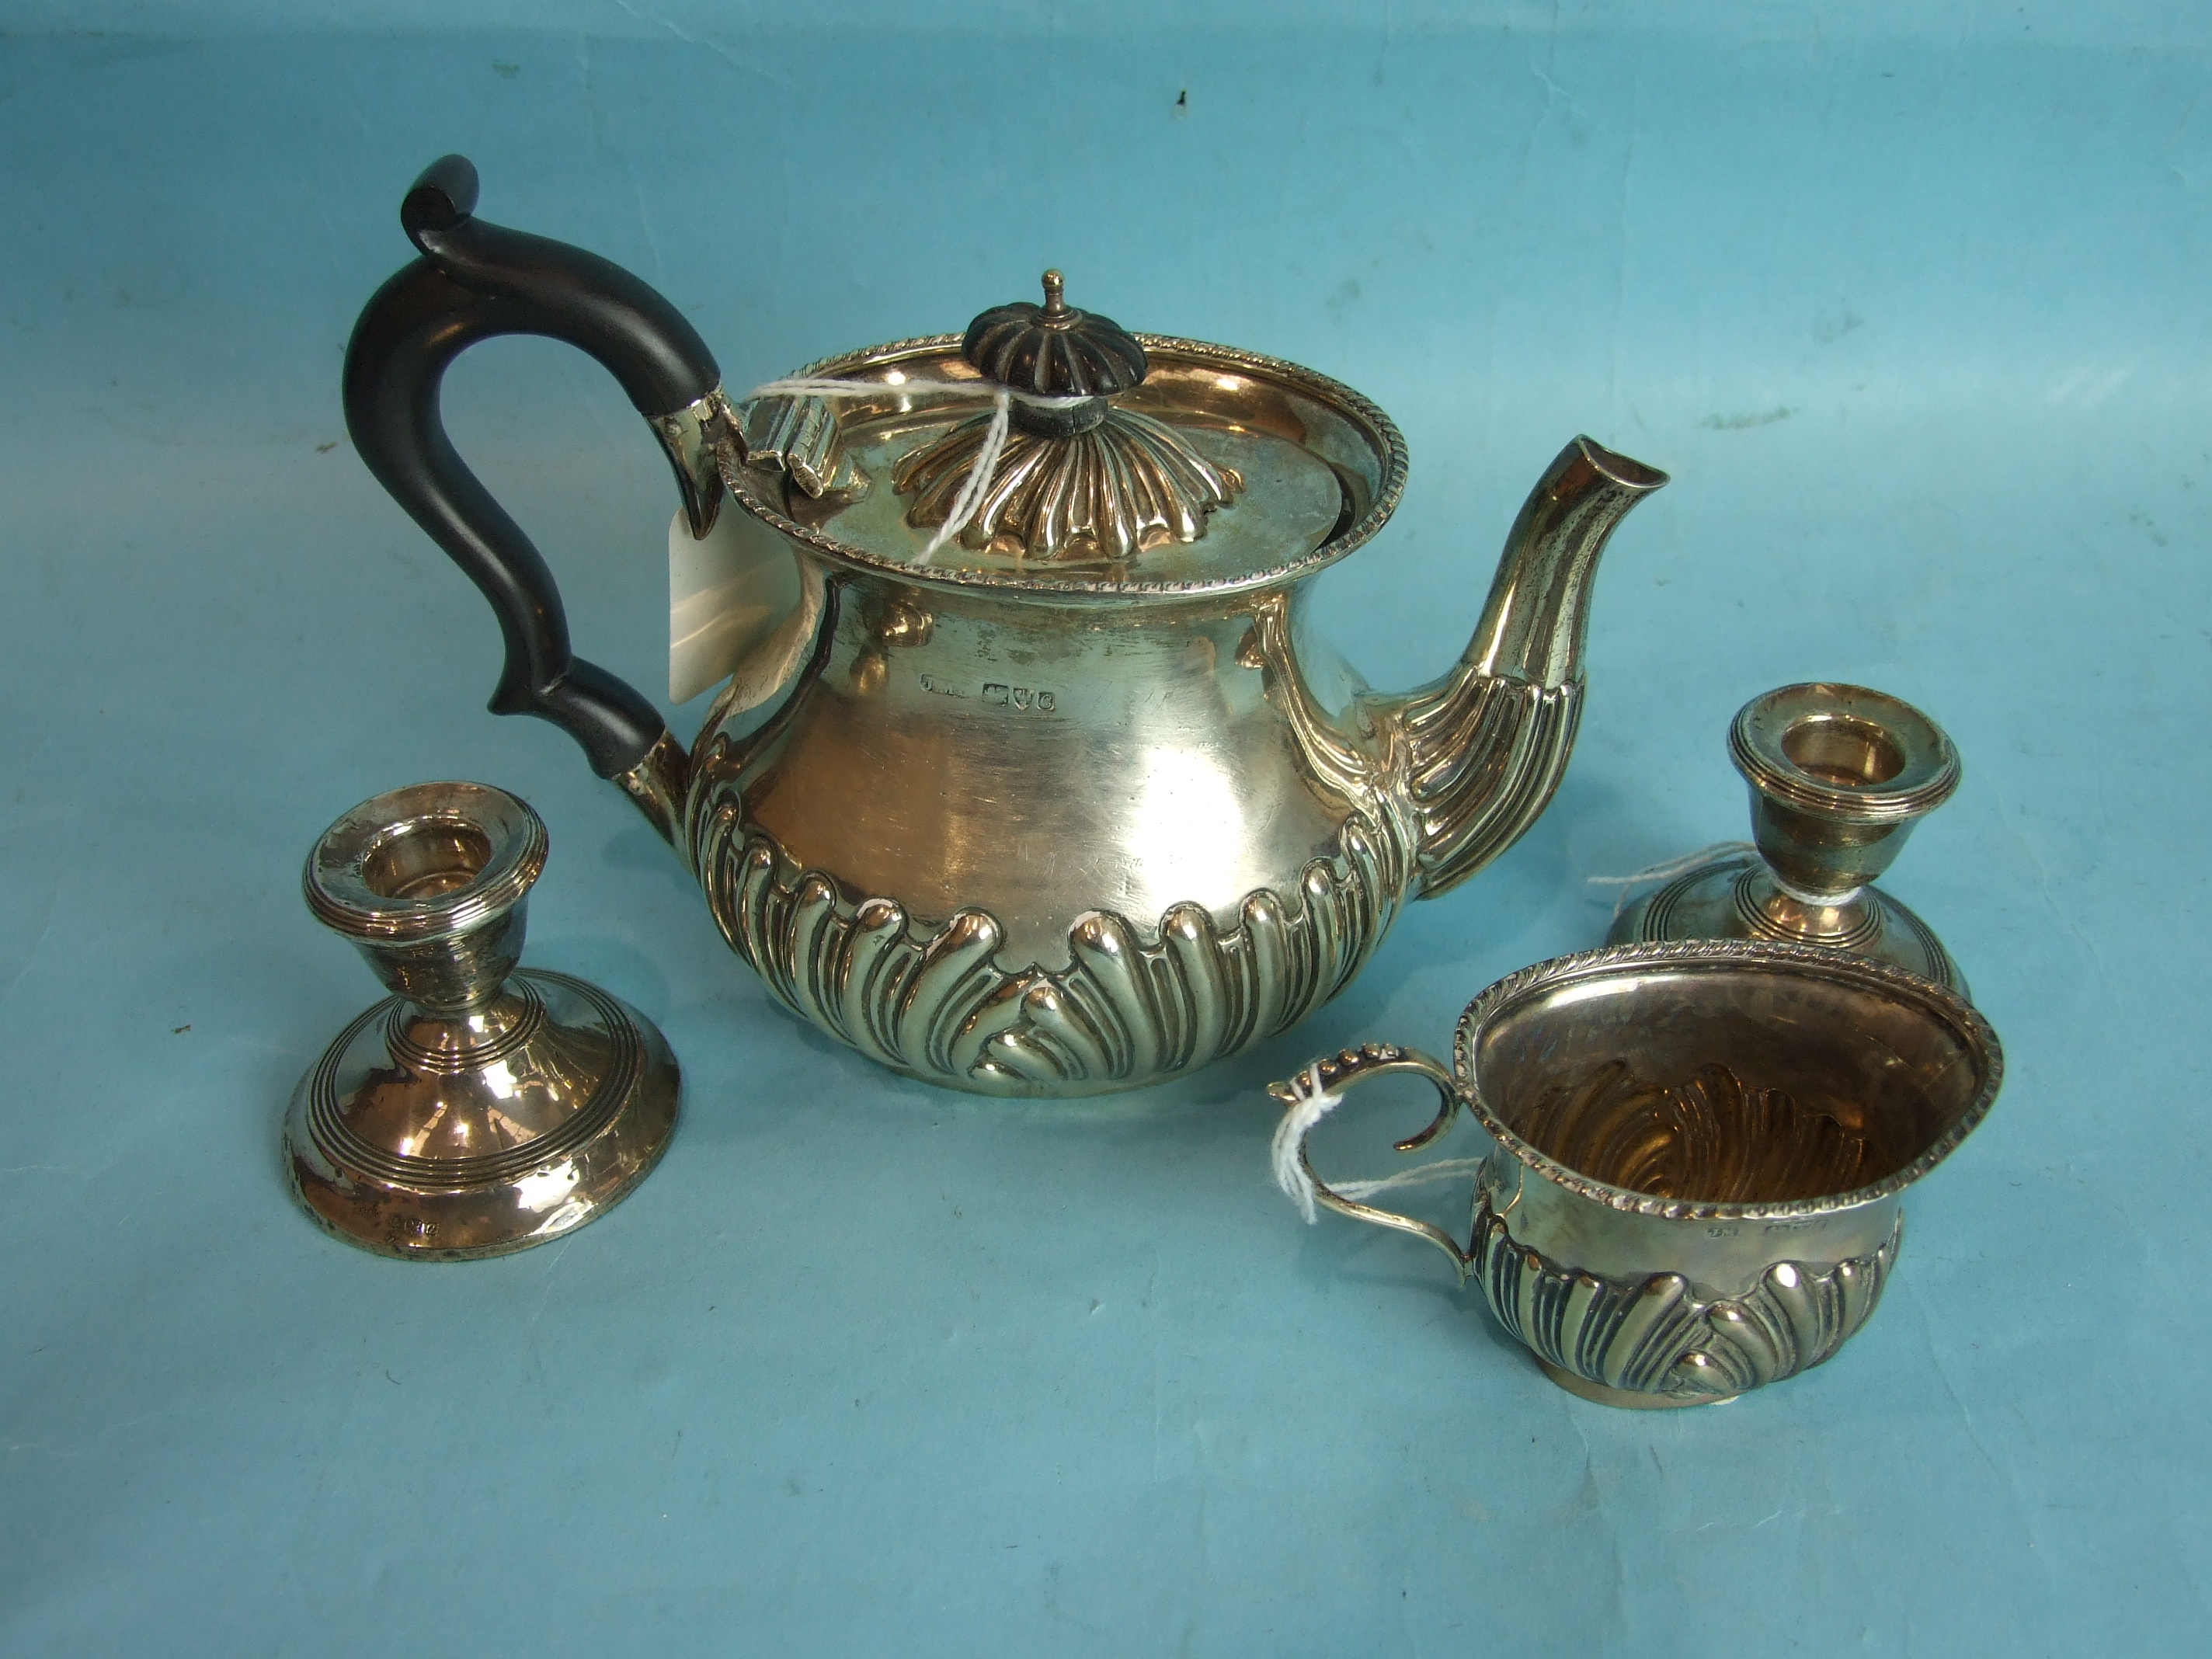 An Edwardian bachelor's half-gadrooned teapot and cream jug, Chester 1903, (inscription removed) and - Image 2 of 2